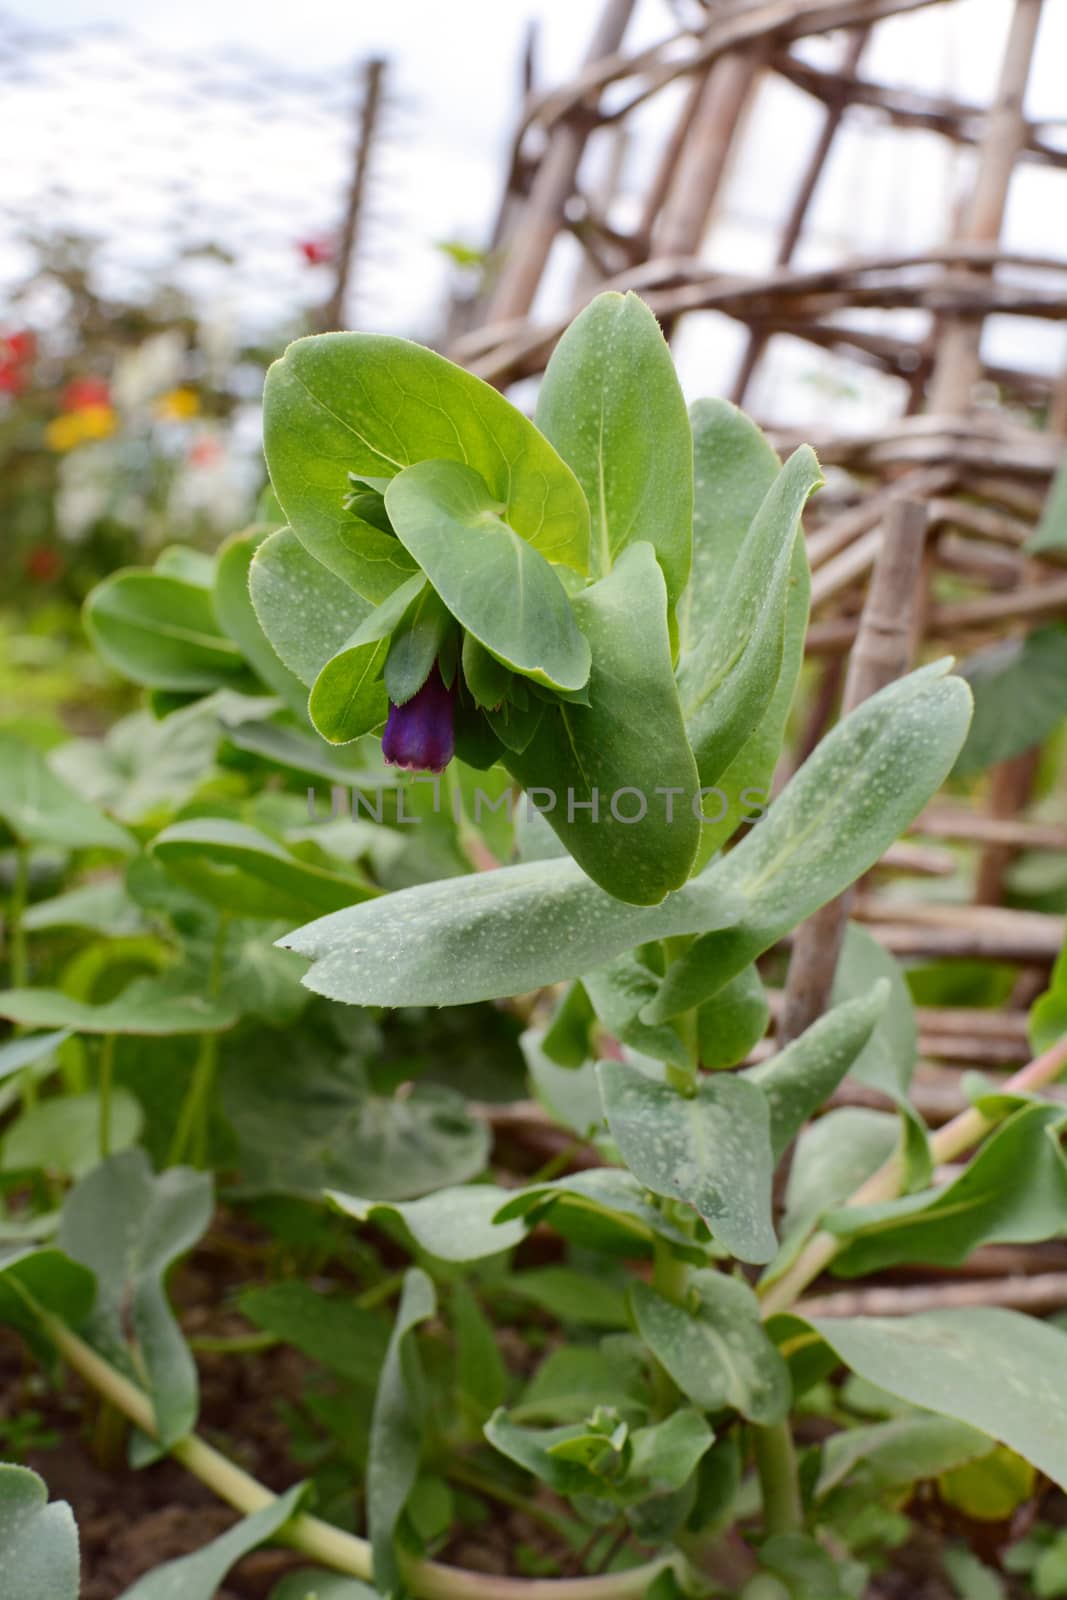 Cerinthe or honeywort, starting to bloom with a purple flower in a flower bed